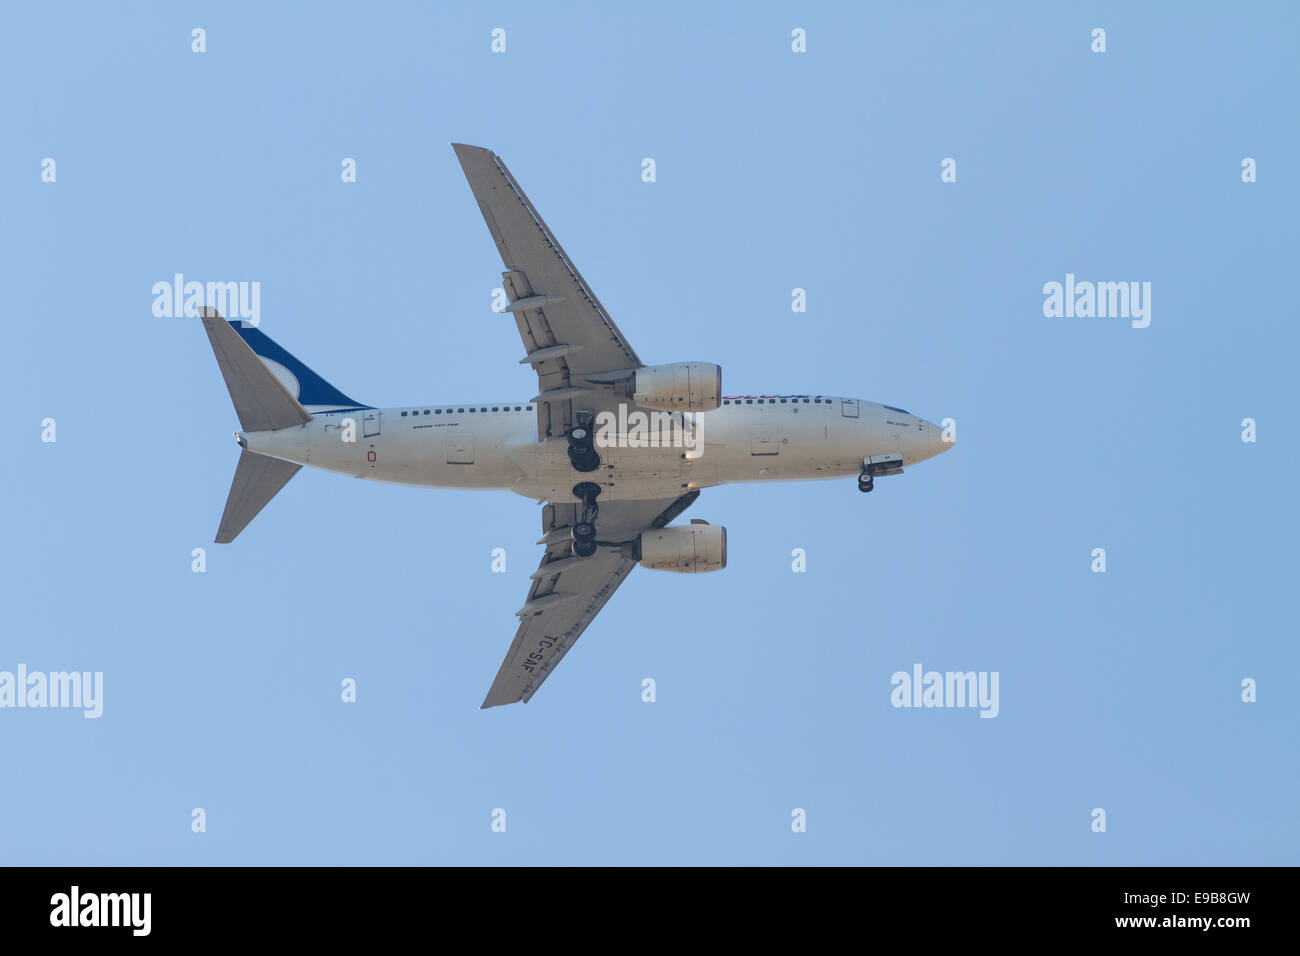 ISTANBUL, TURKEY - JULY 13, 2014: AnadoluJet Boeing 737-700 landing to Sabiha Gokcen Airport. AnadoluJet is low-cost branch of T Stock Photo